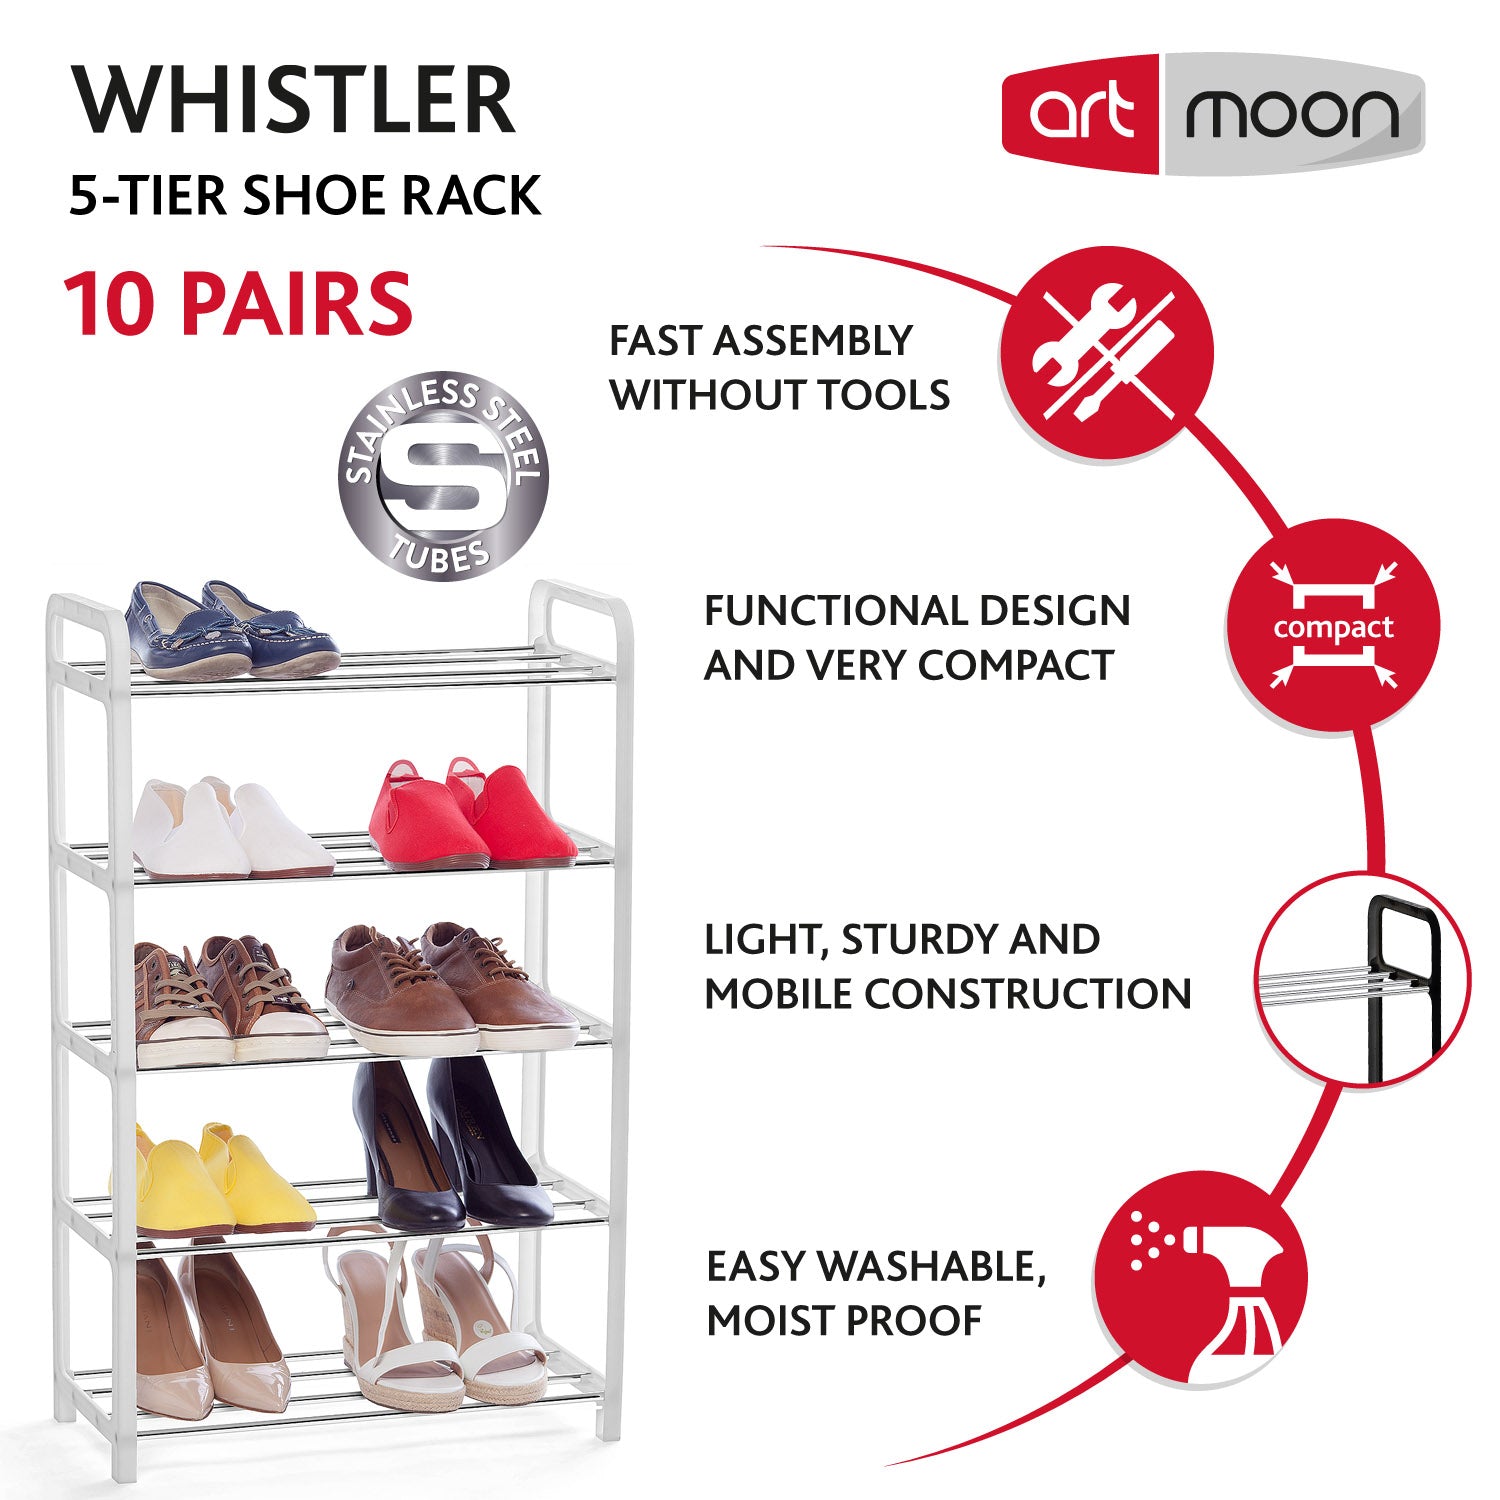 art moon Whistler - Shoe Rack 5 Tier, Holds up to 10 Pairs of Shoes, Fits into Narrow Spaces, Rustproof Metal Poles and Plastic Frame, White